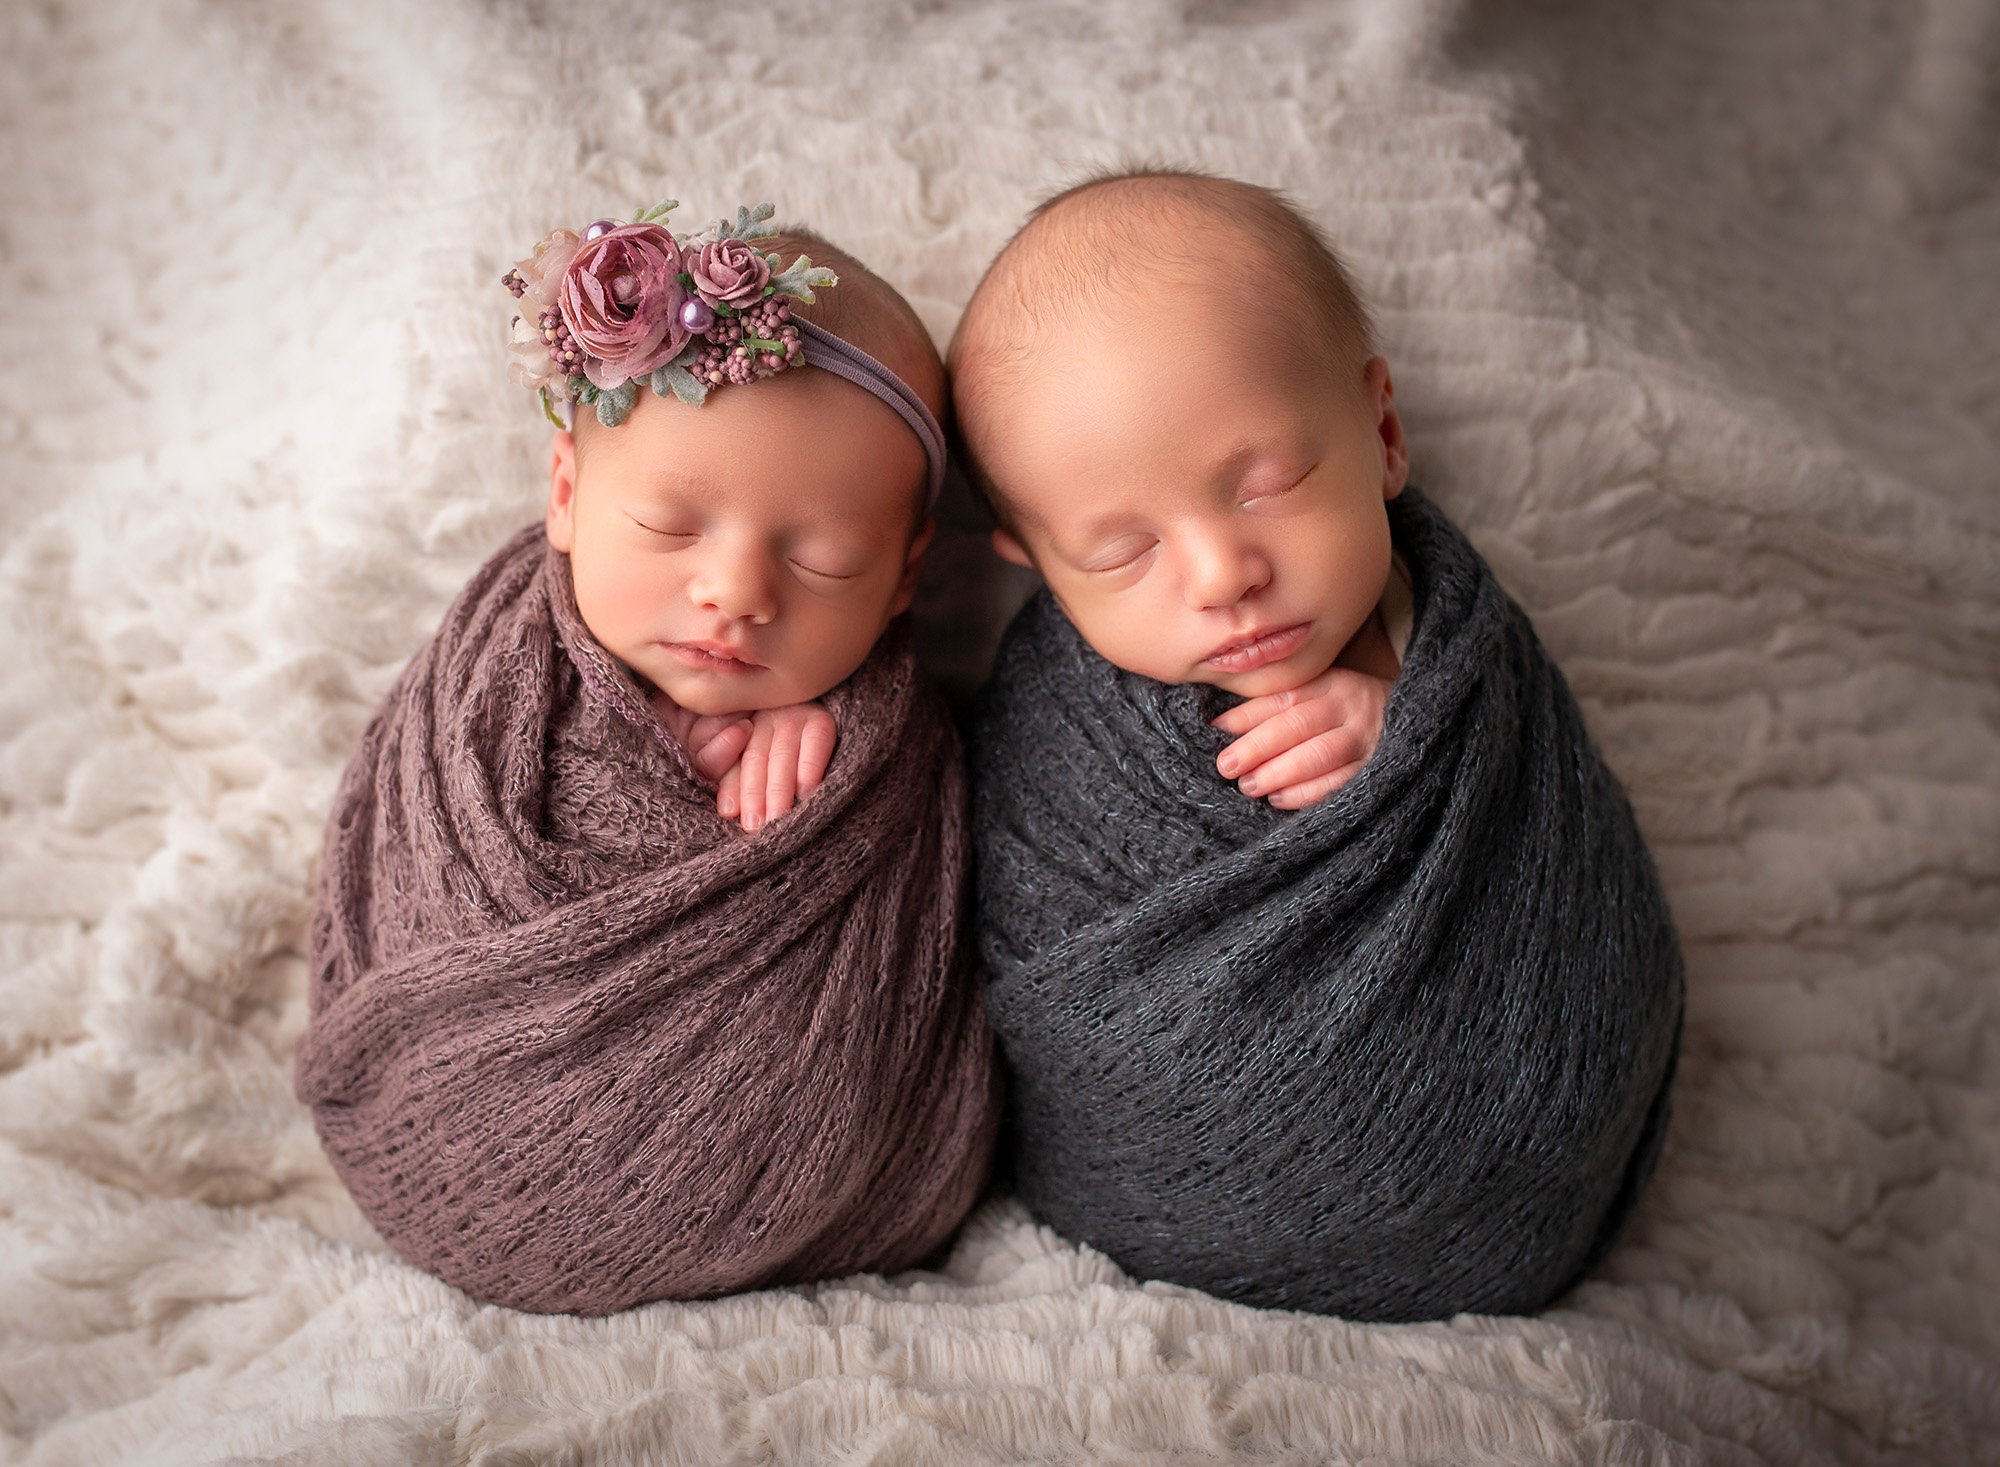 newborn twins asleep swaddled next to each other on fluffy blanket